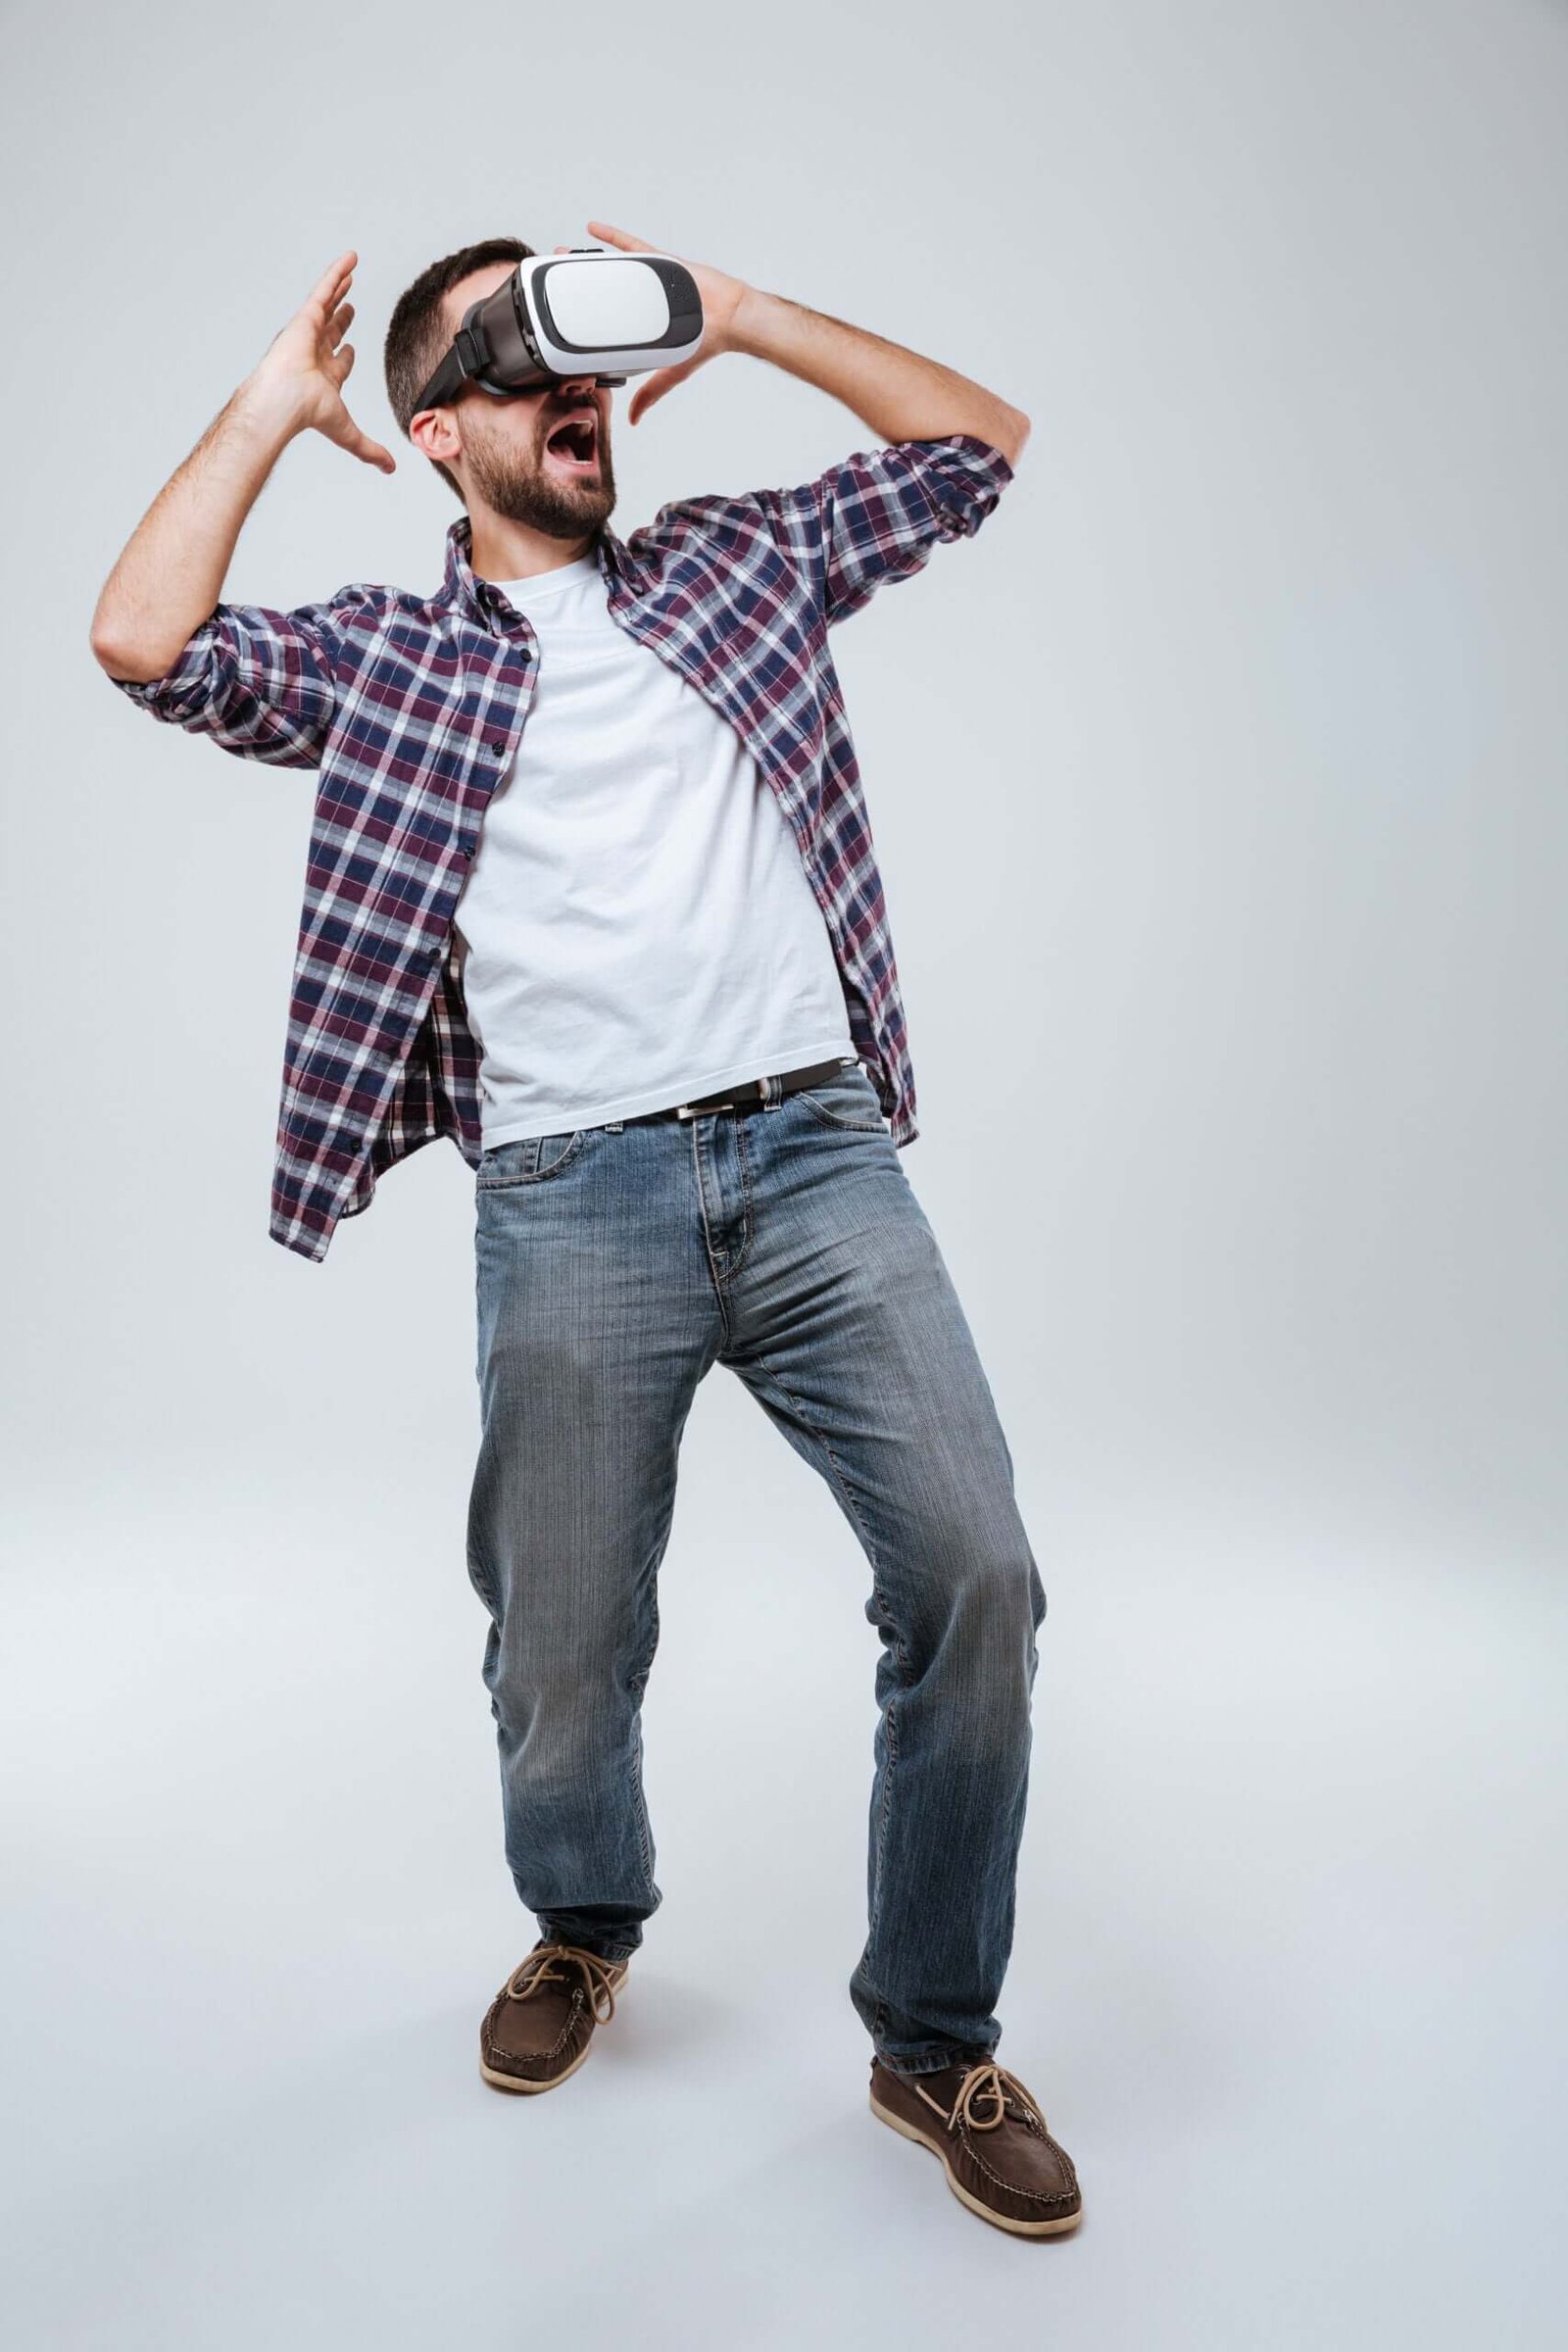 Vertical image Bearded man in shirt using virtual reality device